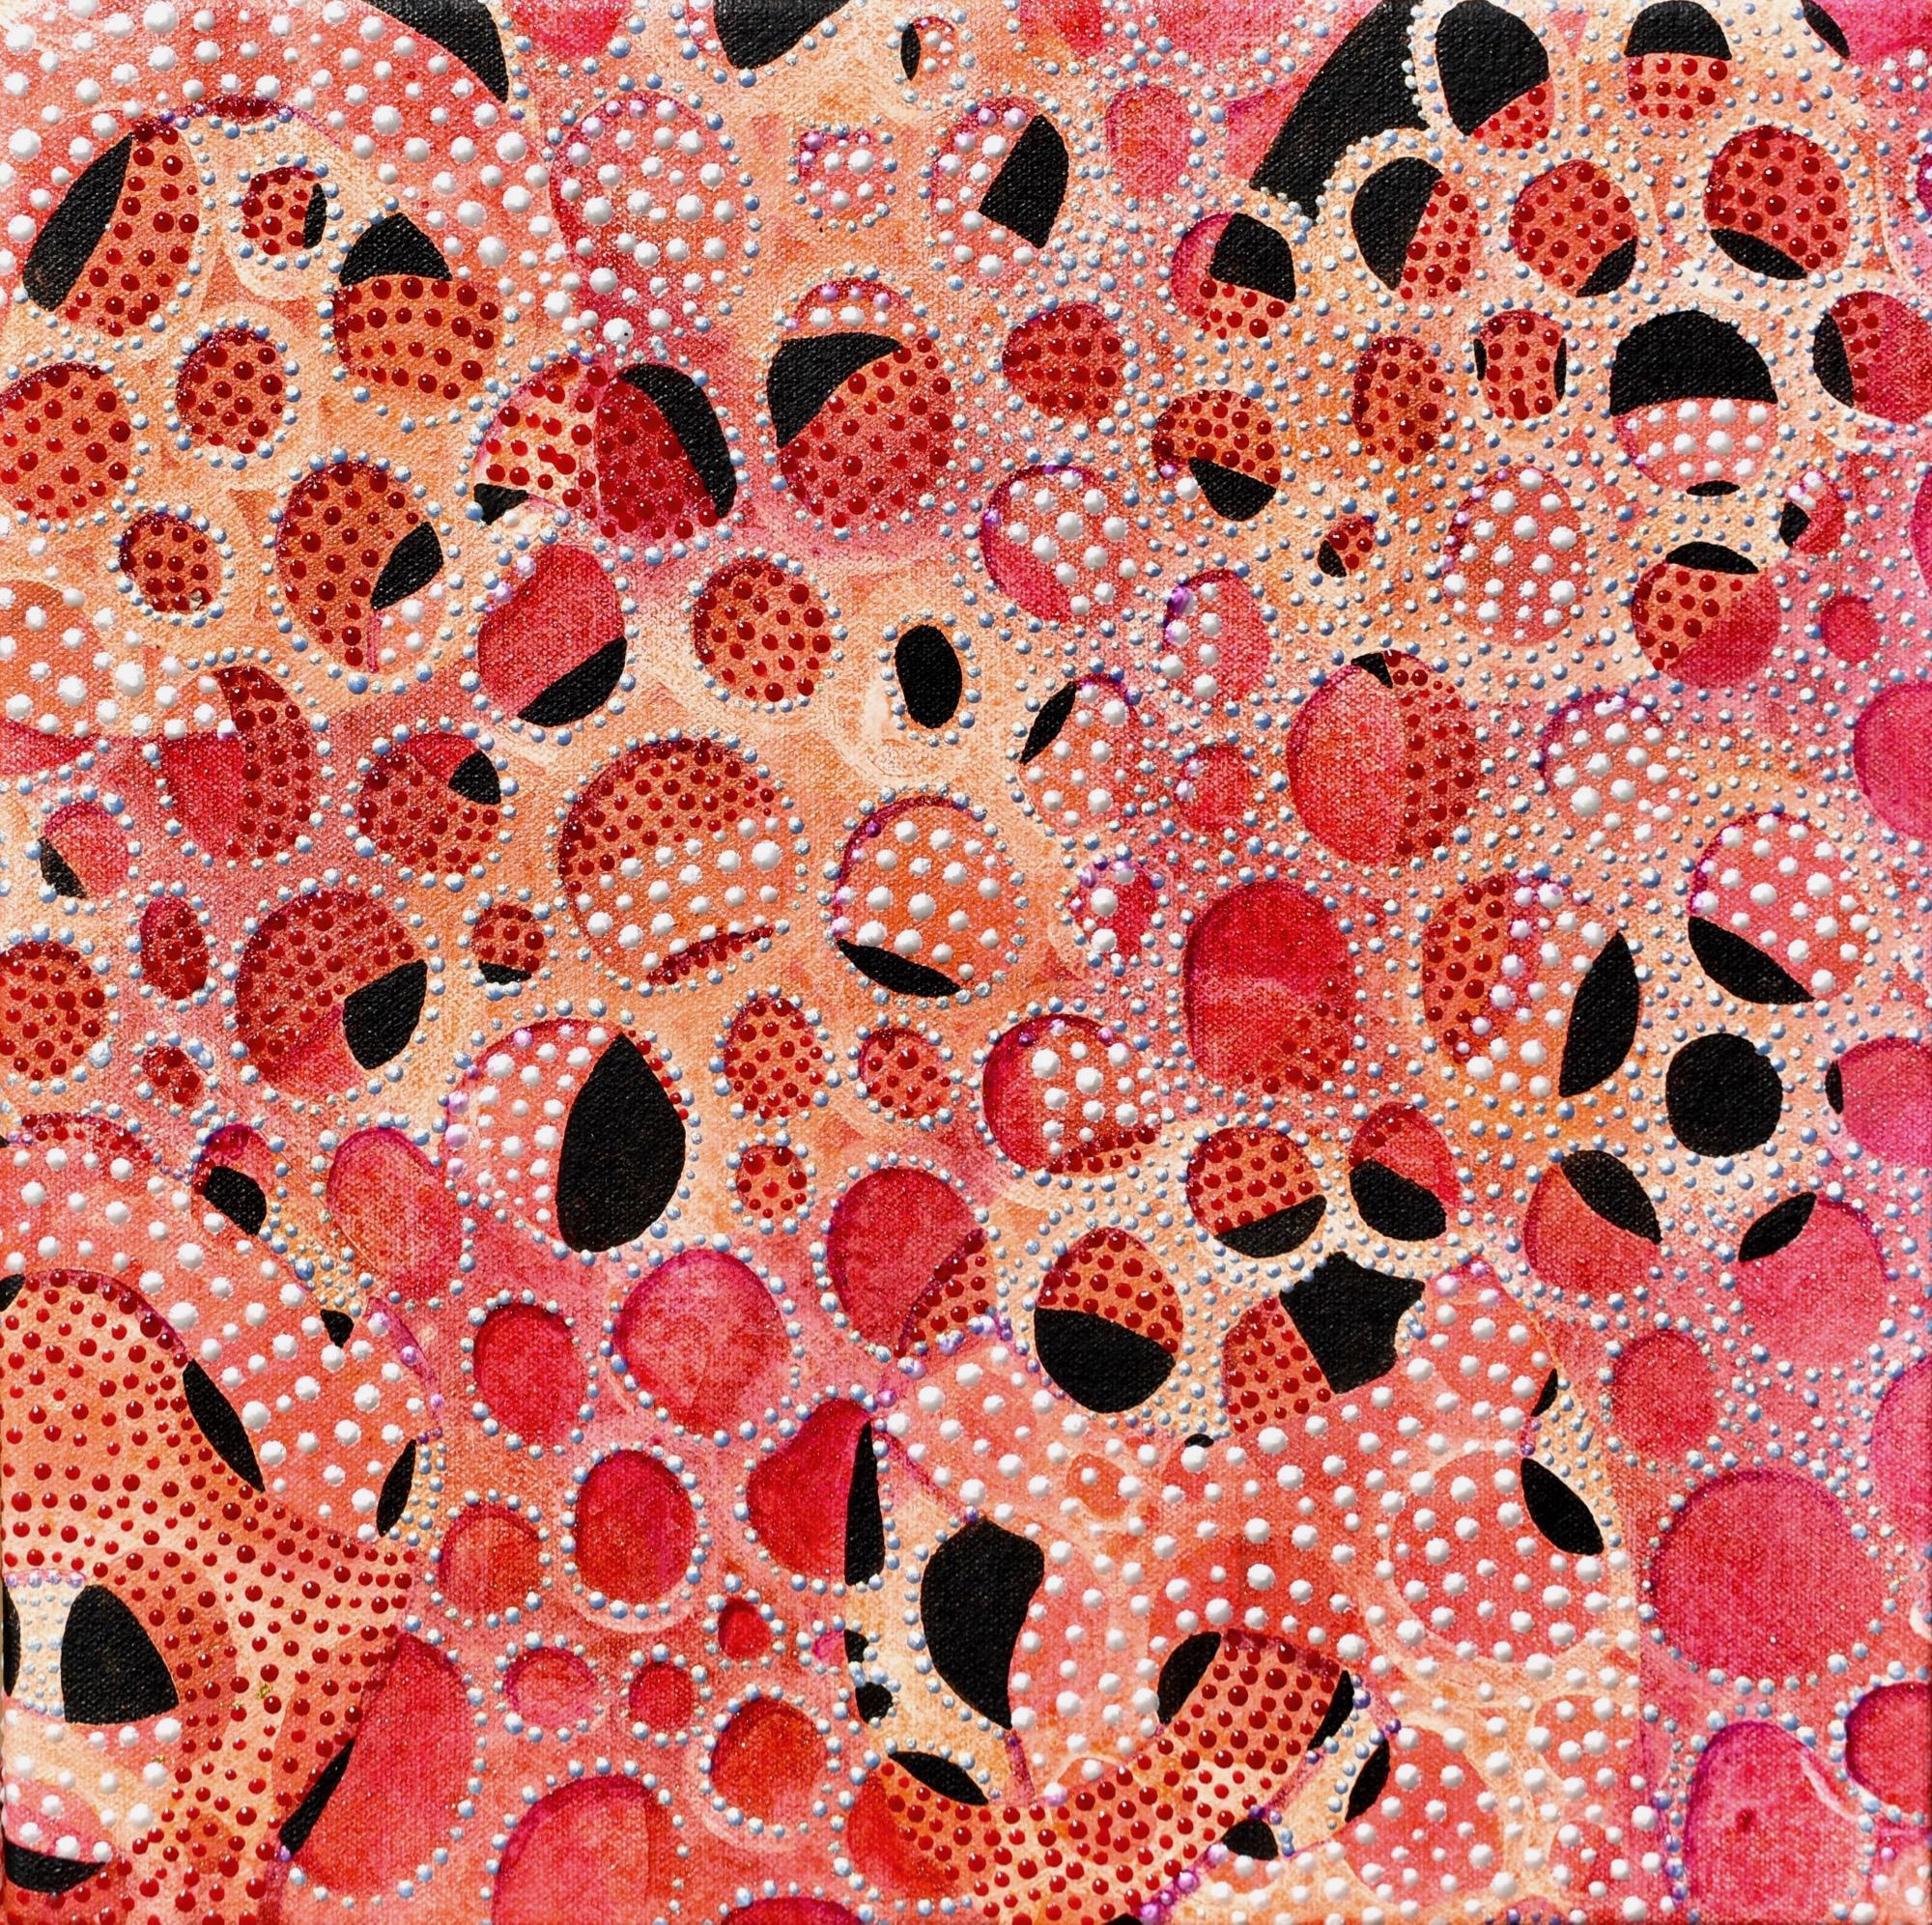 Denise Driscoll Abstract Painting - "Shimmer 8", abstract, coral, peach, rose, black, dots, acrylic painting